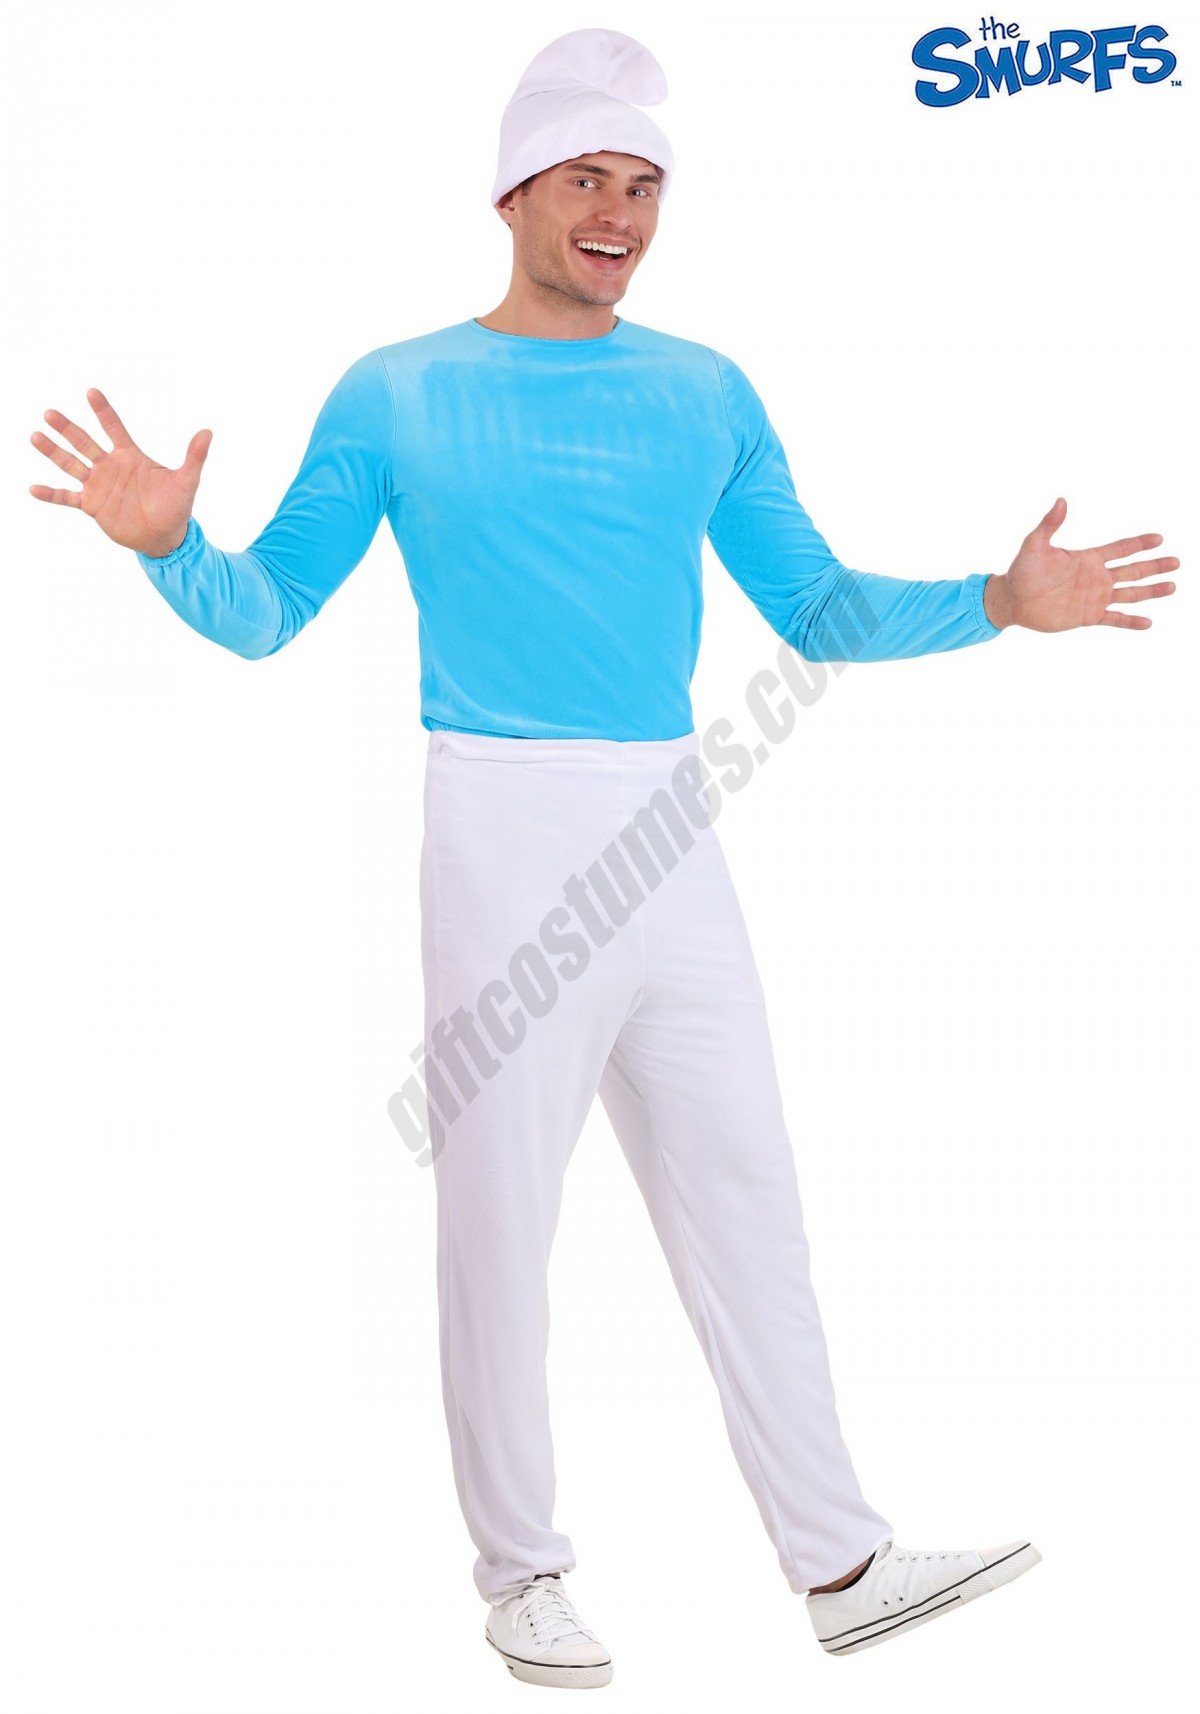  The Smurfs Plus Size Smurf Costume for men Promotions - -0